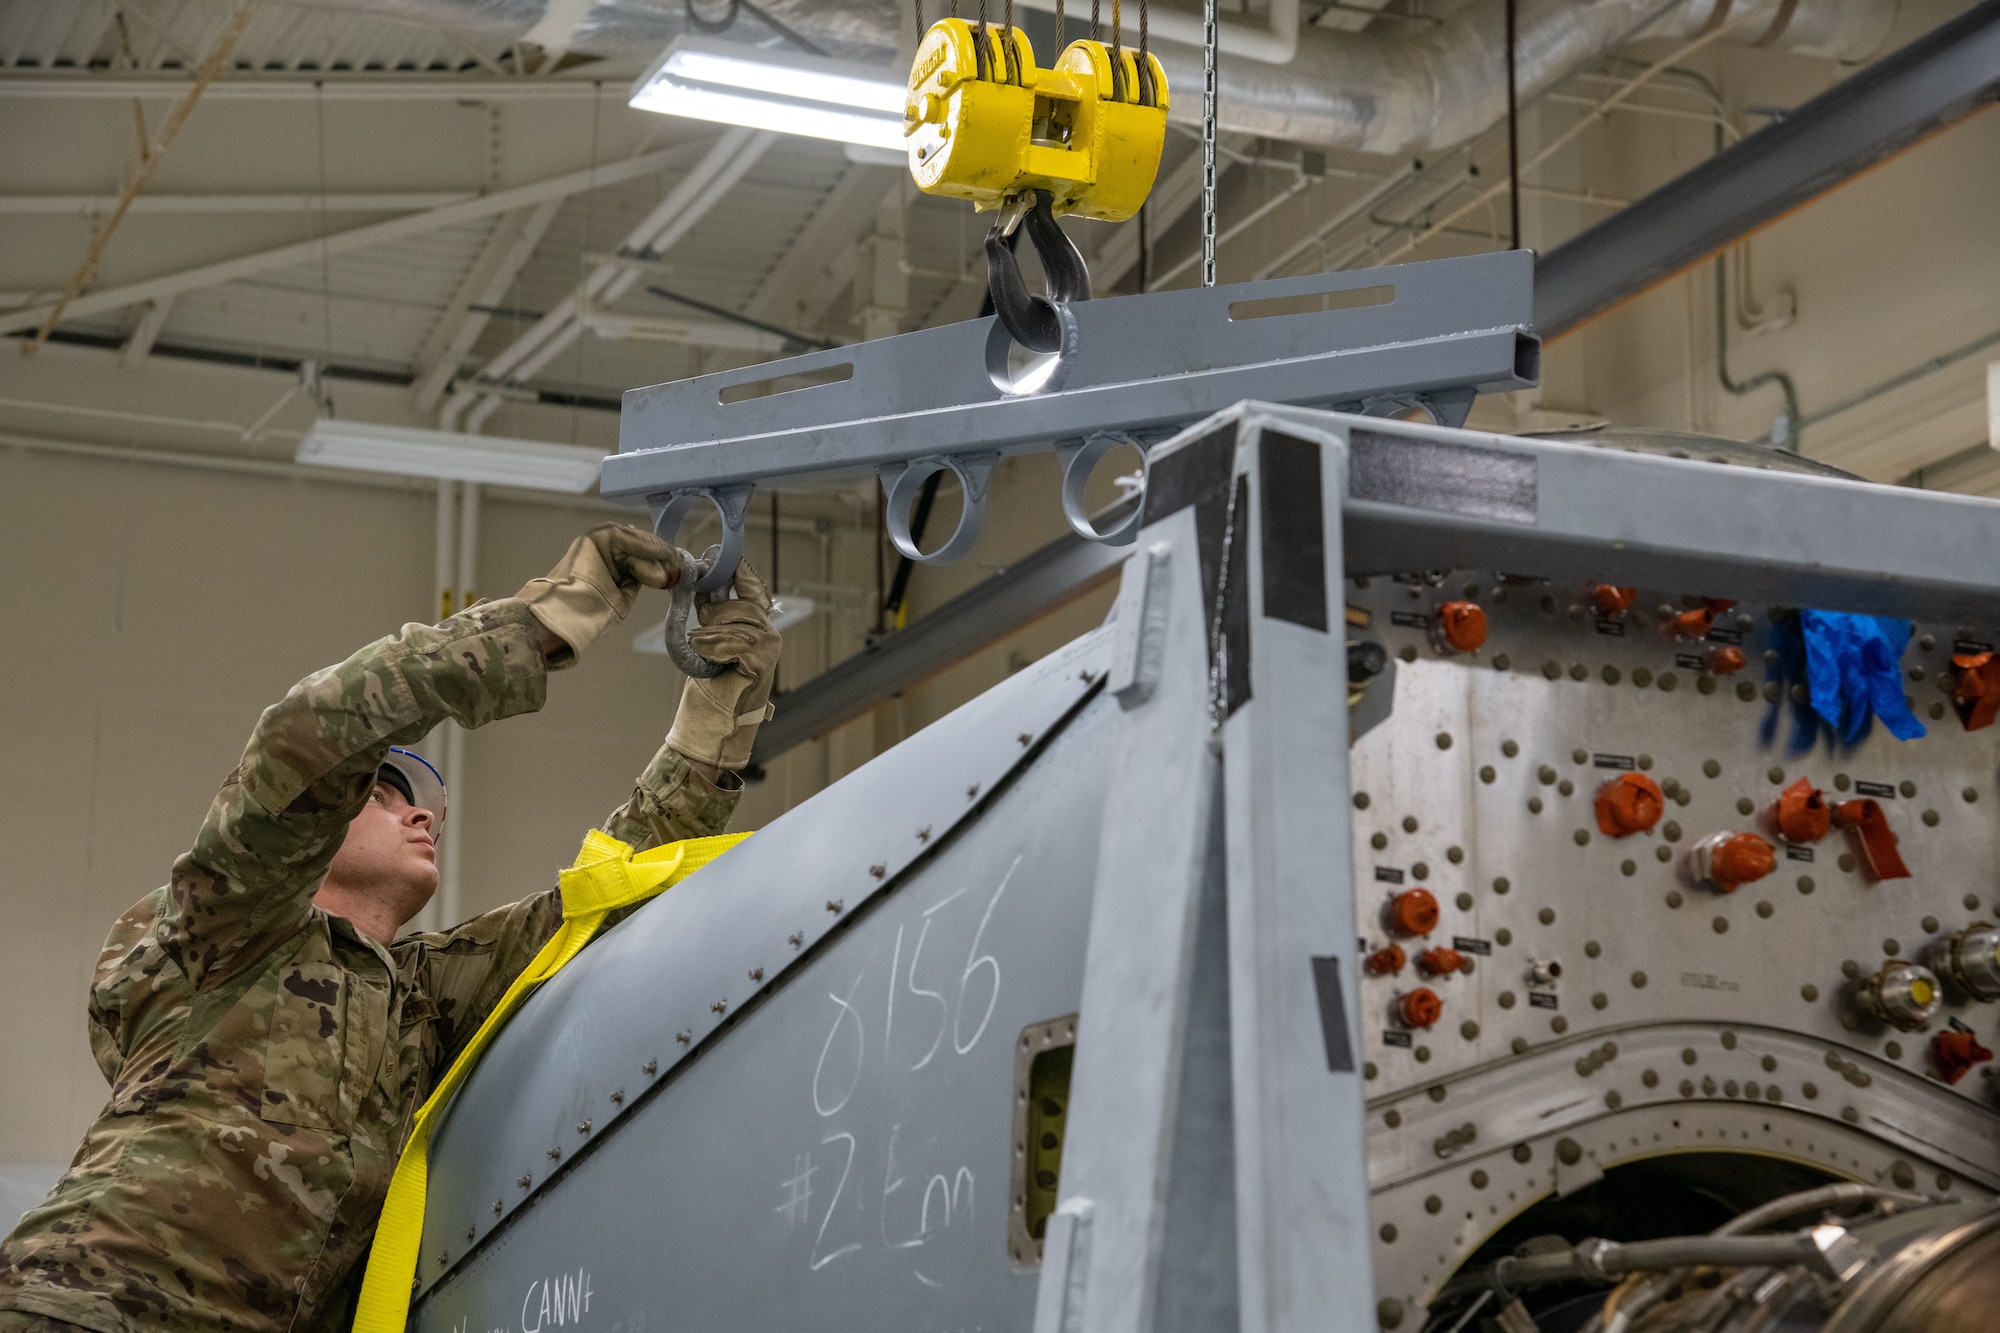 An Airman reaches above an engine to a metal piece hanging from a hoist to undo a shackle